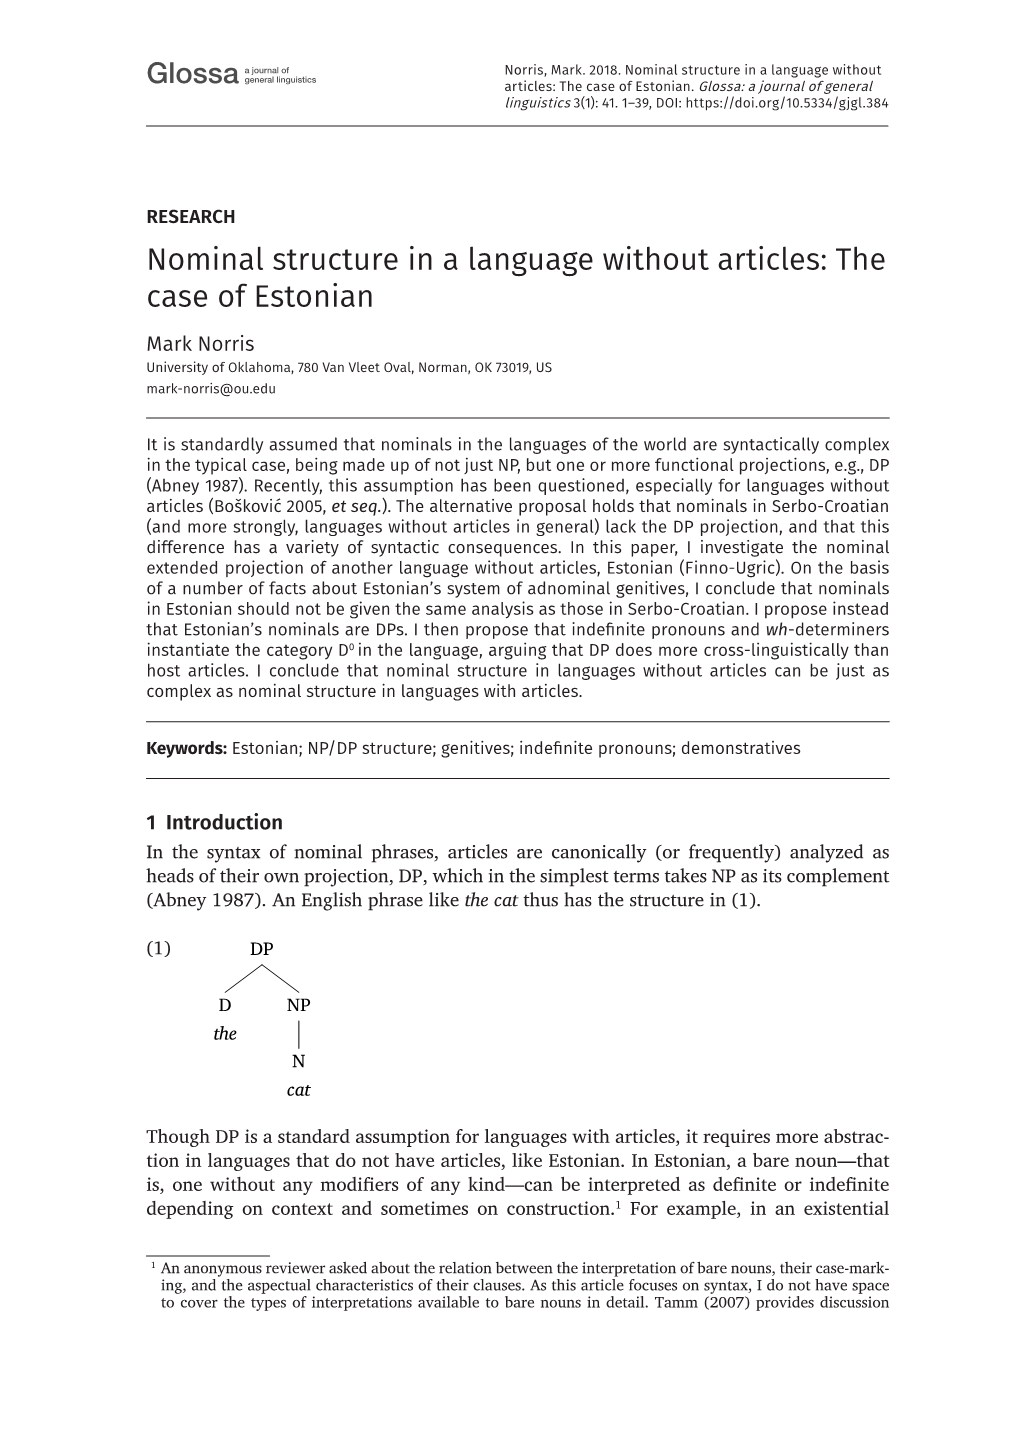 Nominal Structure in a Language Without Articles: the Case of Estonian Mark Norris University of Oklahoma, 780 Van Vleet Oval, Norman, OK 73019, US Mark-Norris@Ou.Edu